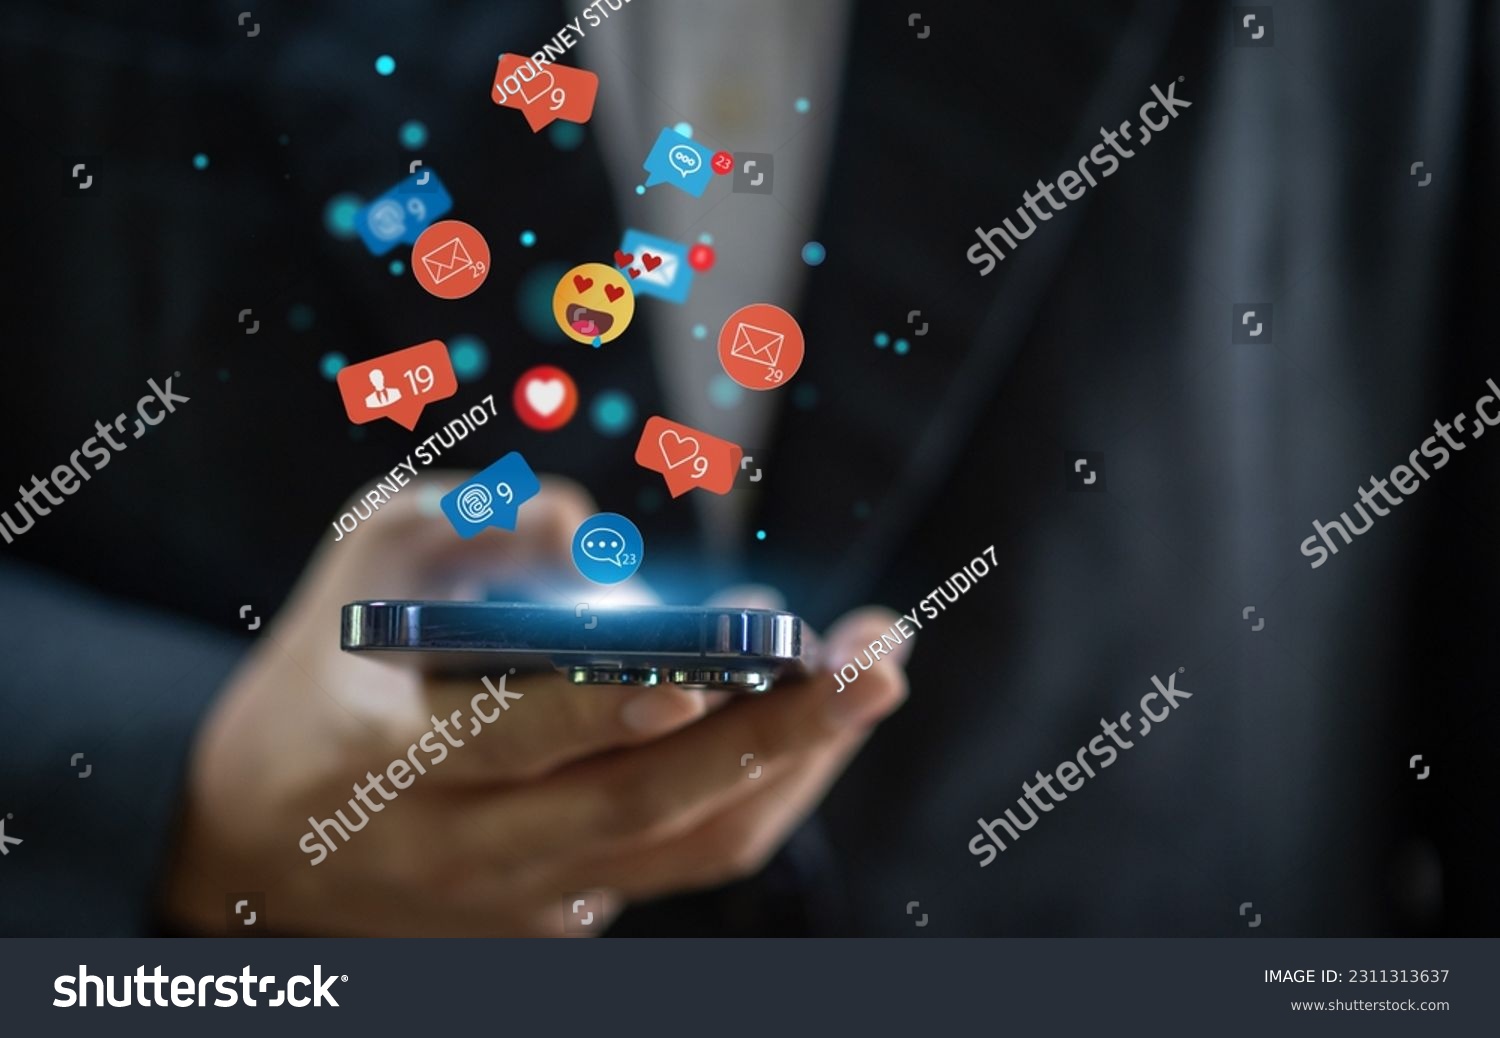 Concept of social media communication and digital online, people use smartphone playing with icon online social media, online marketing, technology, chat, post, like, follow at phone screen #2311313637